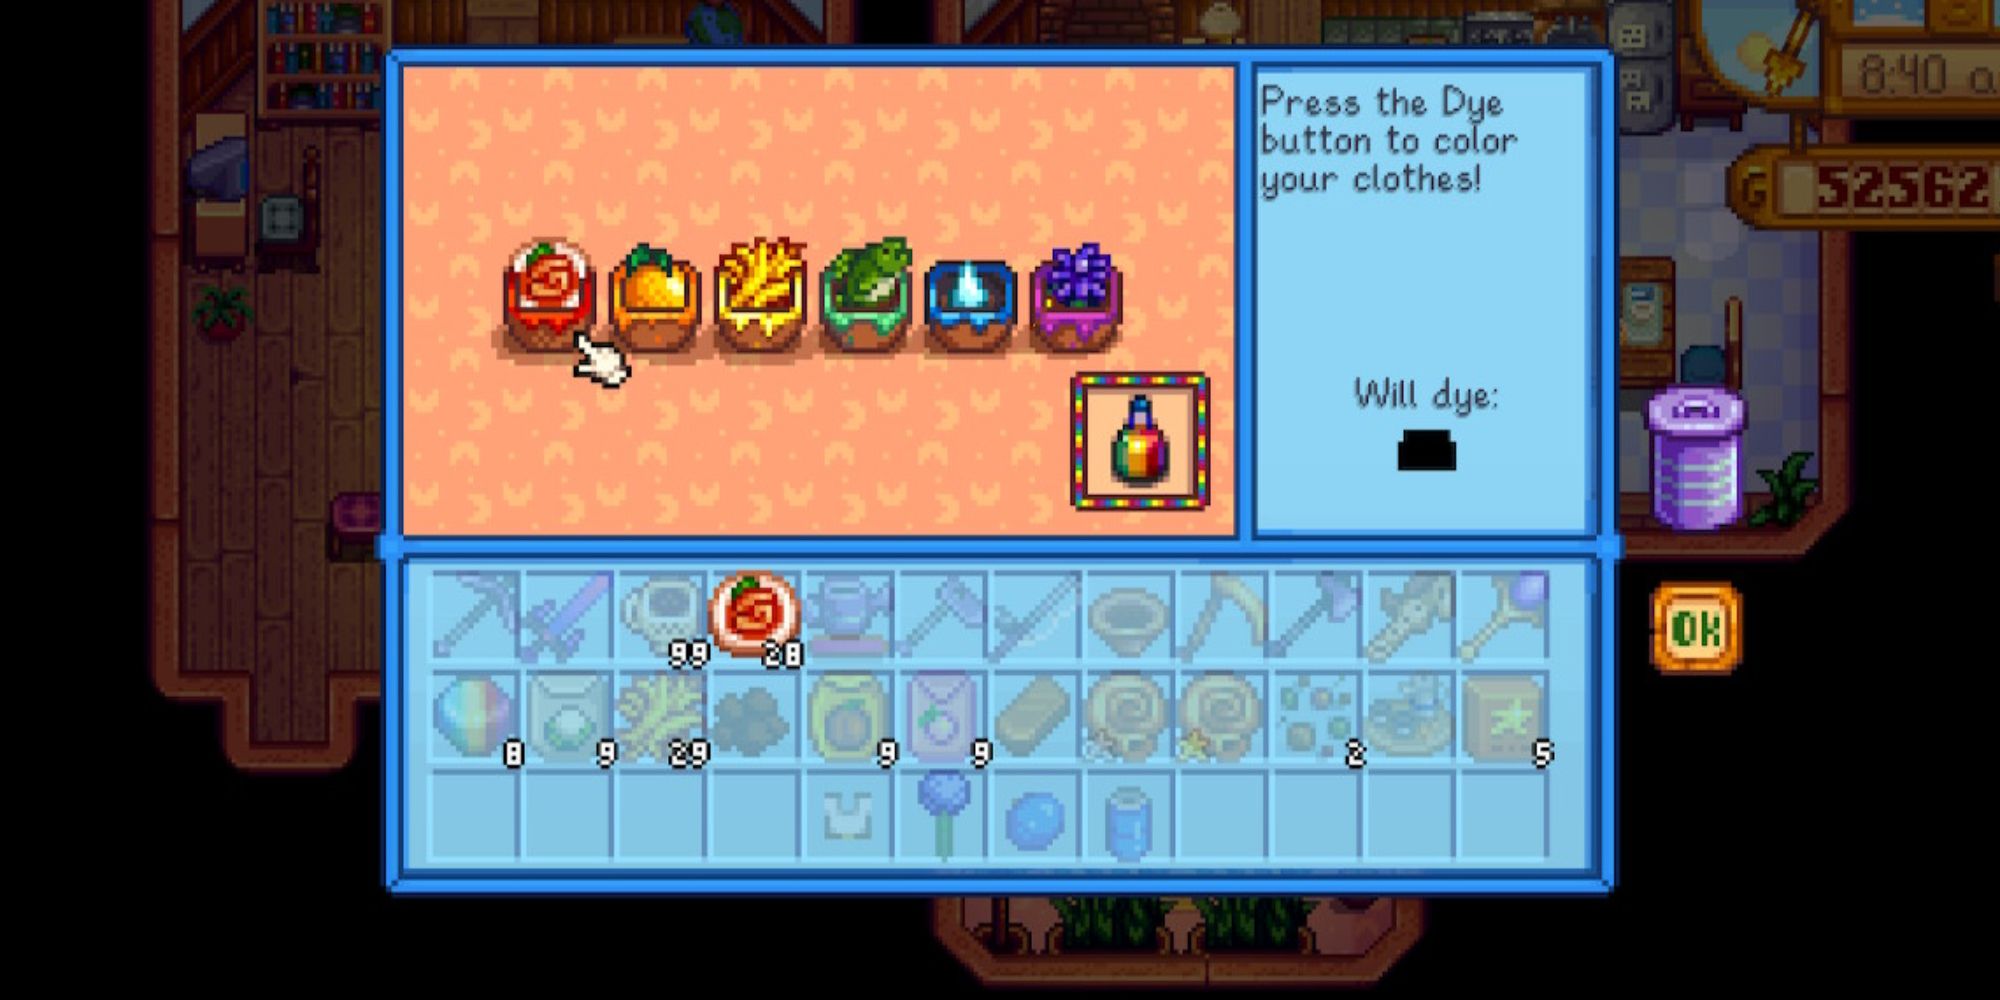 Stardew Valley Clothes Dyeing Guide